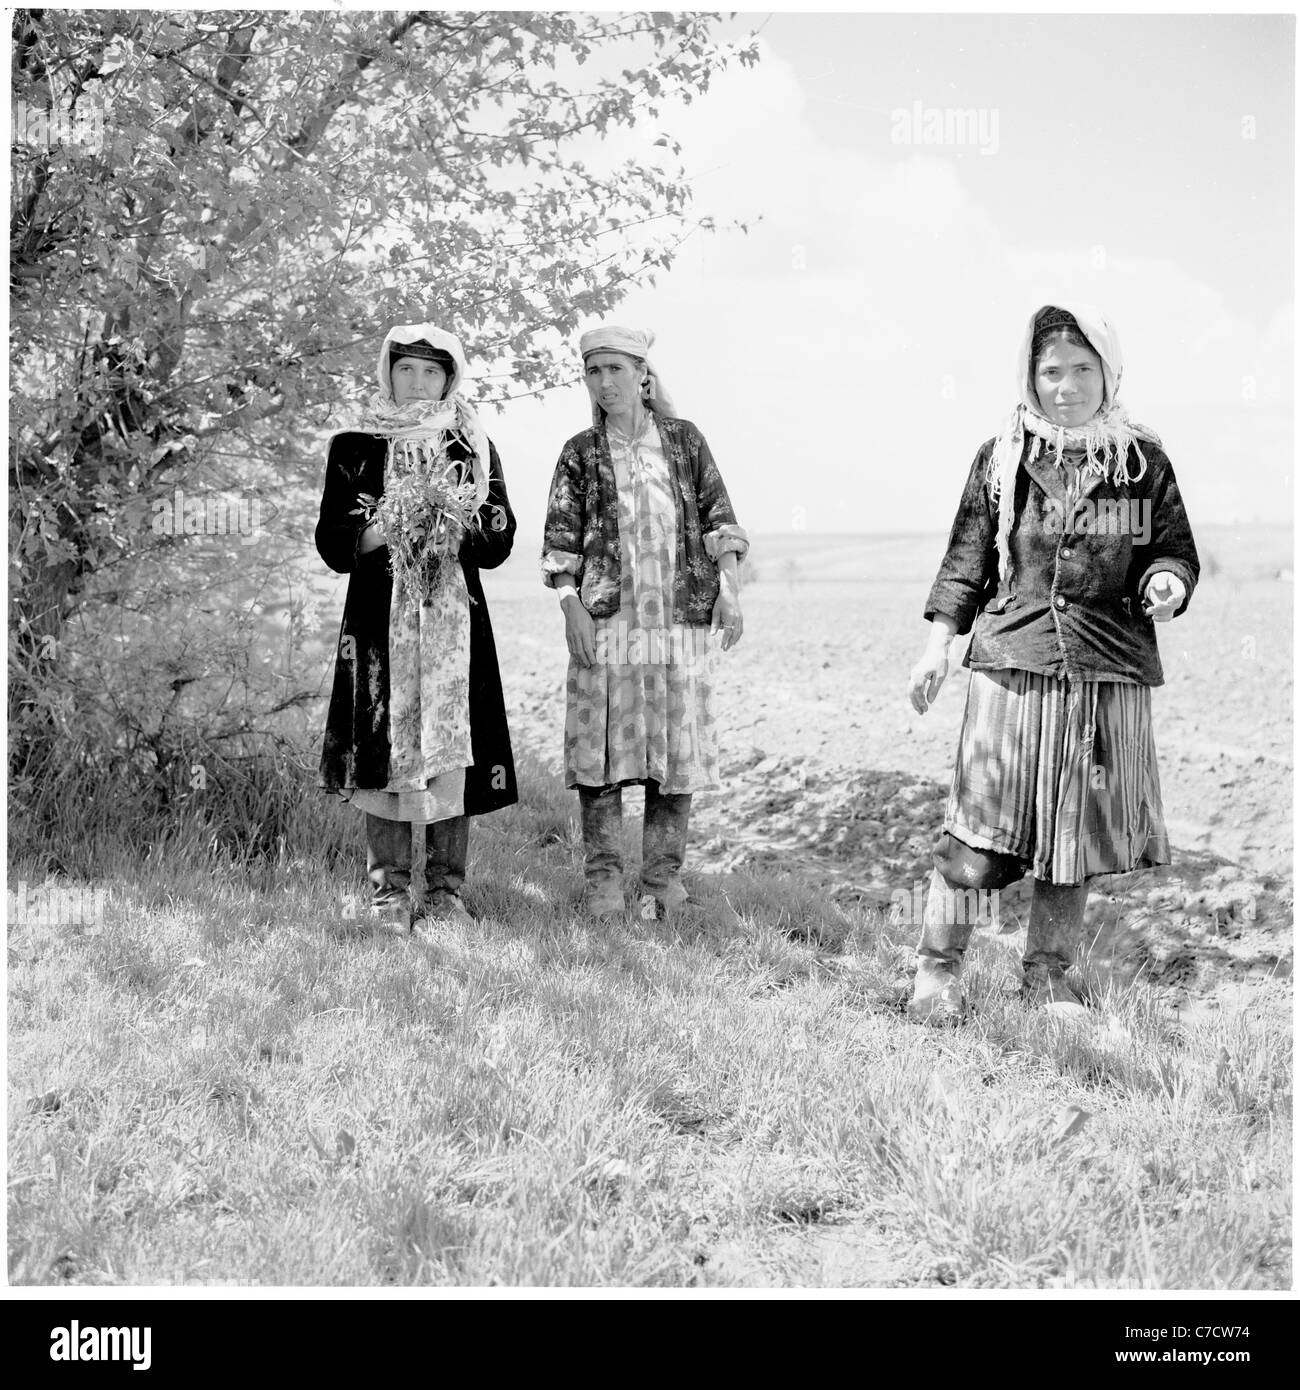 Historical picture from 1950s of three Russian women wearing robes walking in a field. Stock Photo